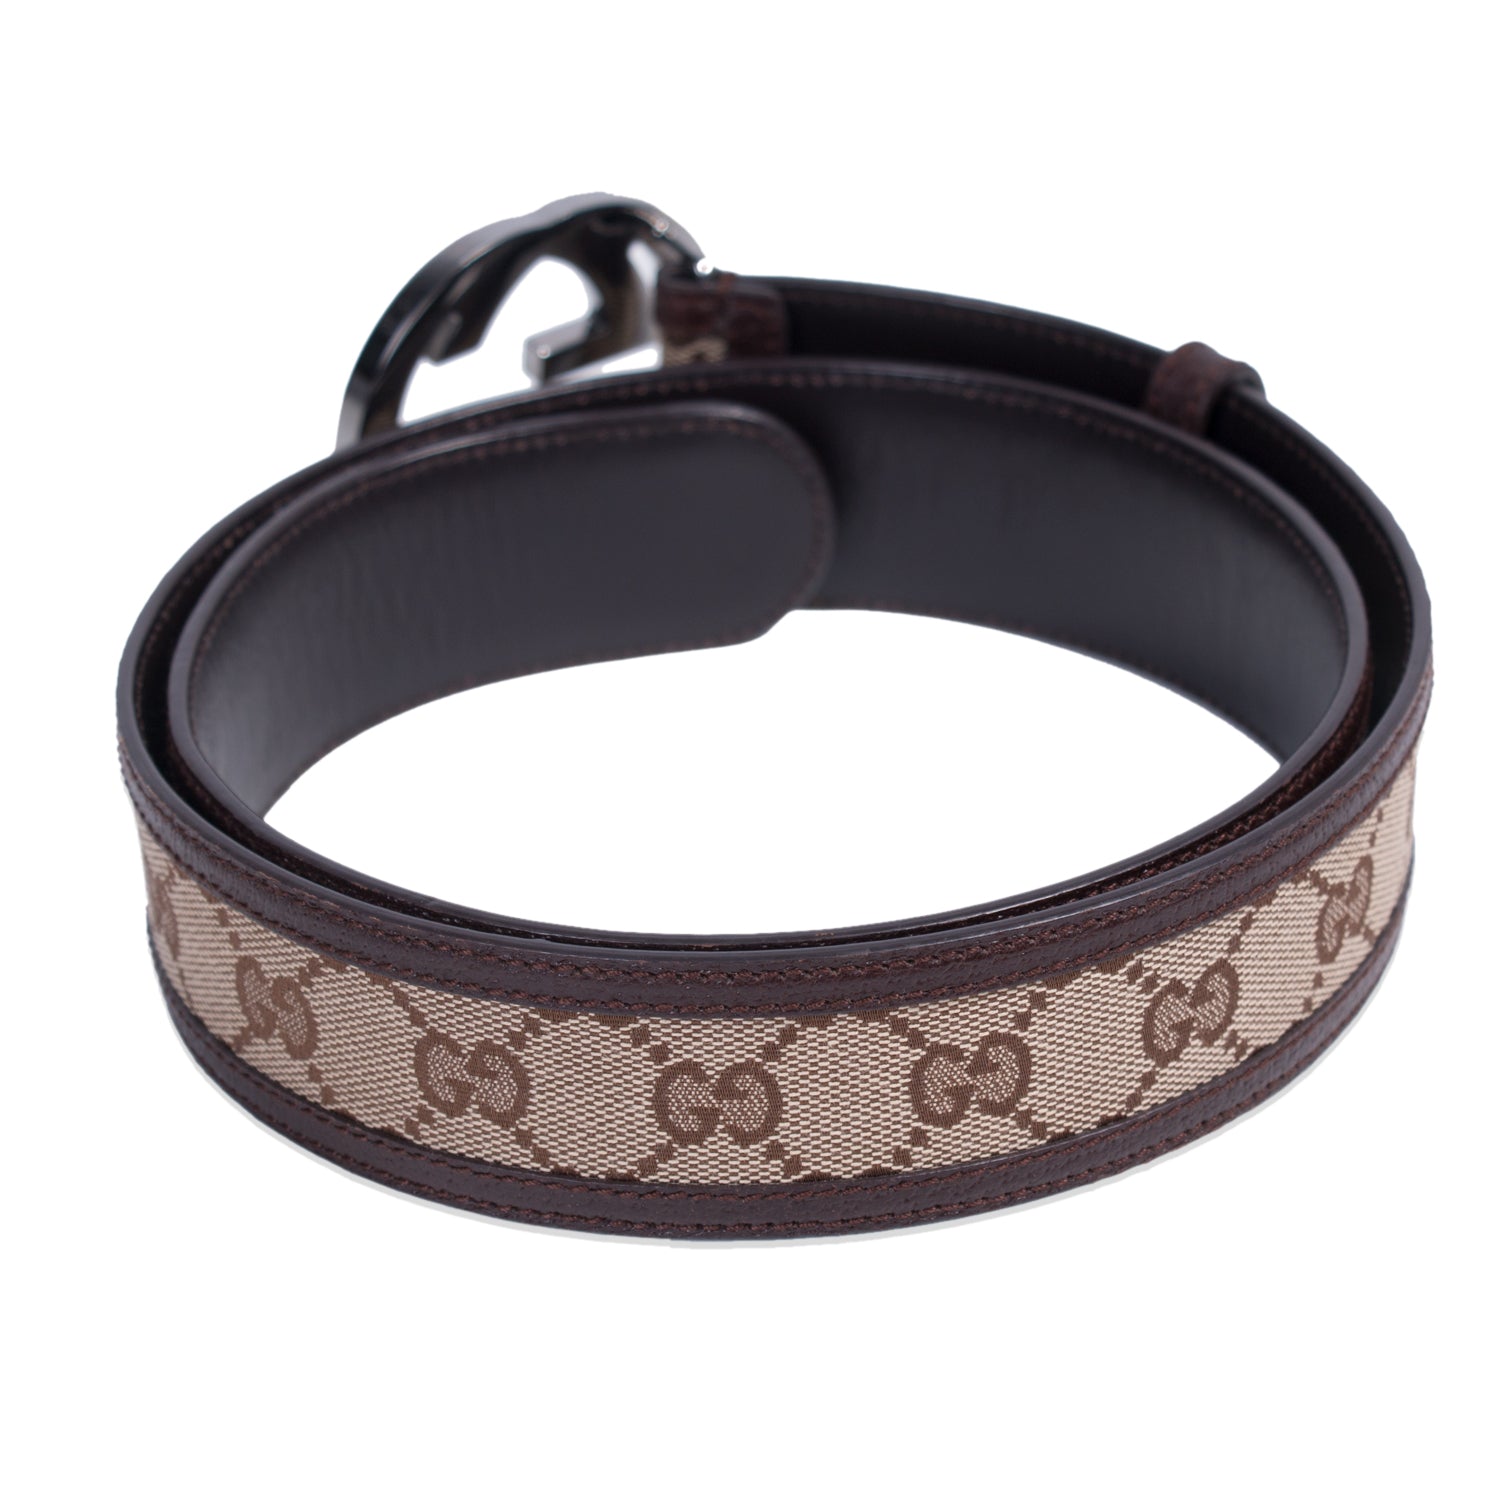 Shop authentic Gucci GG Interlocking Canvas Belt at revogue for just ...